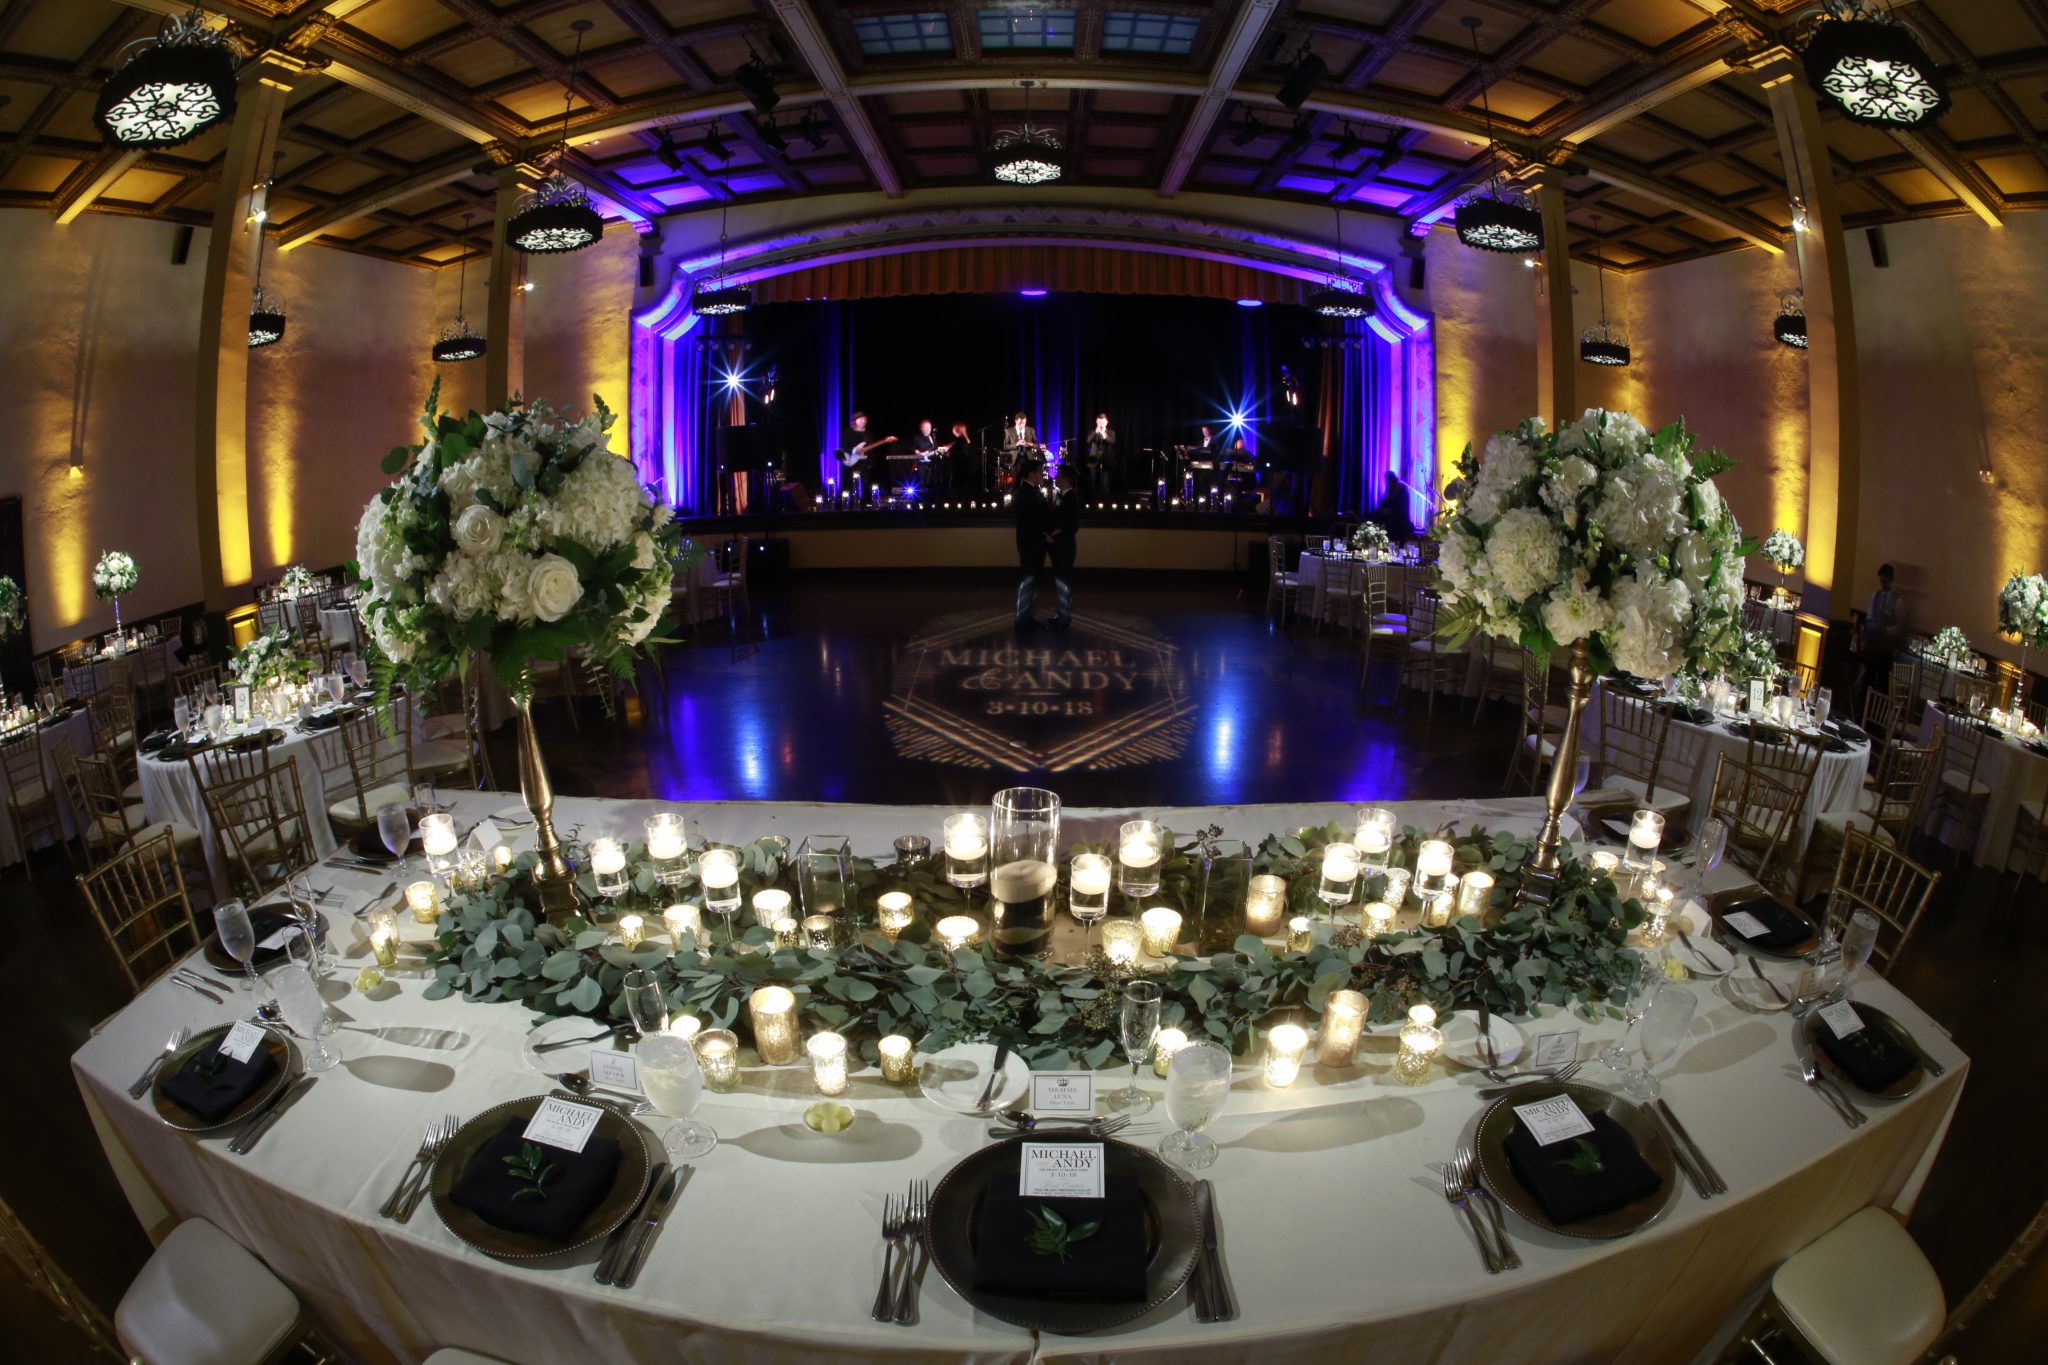 Wedding reception with amazing flowers and centerpieces